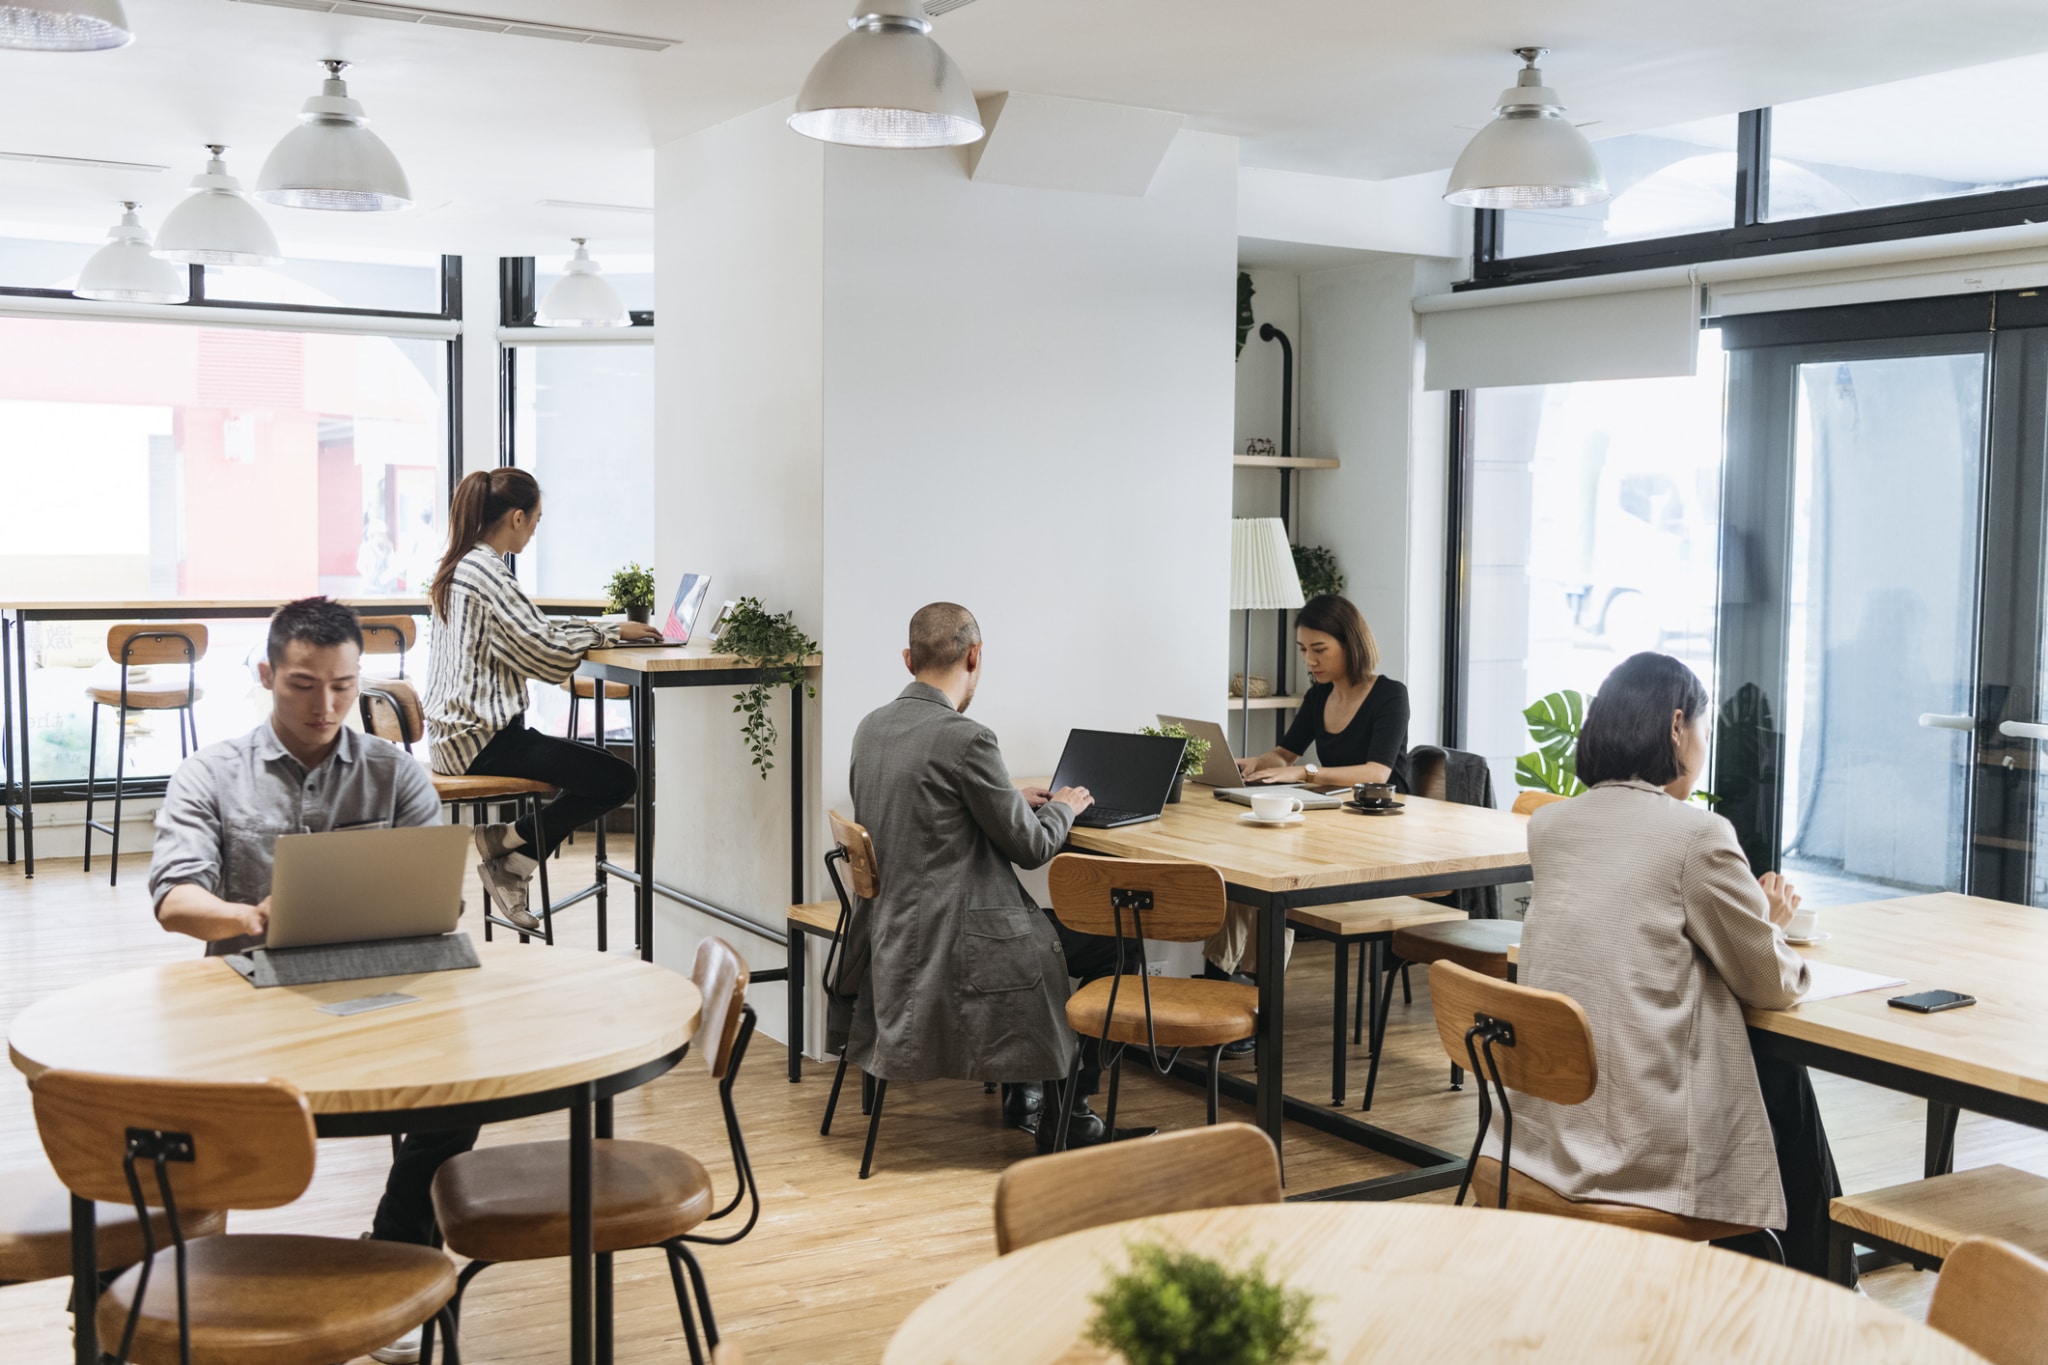 Hybrid workers working in a shared coworking space